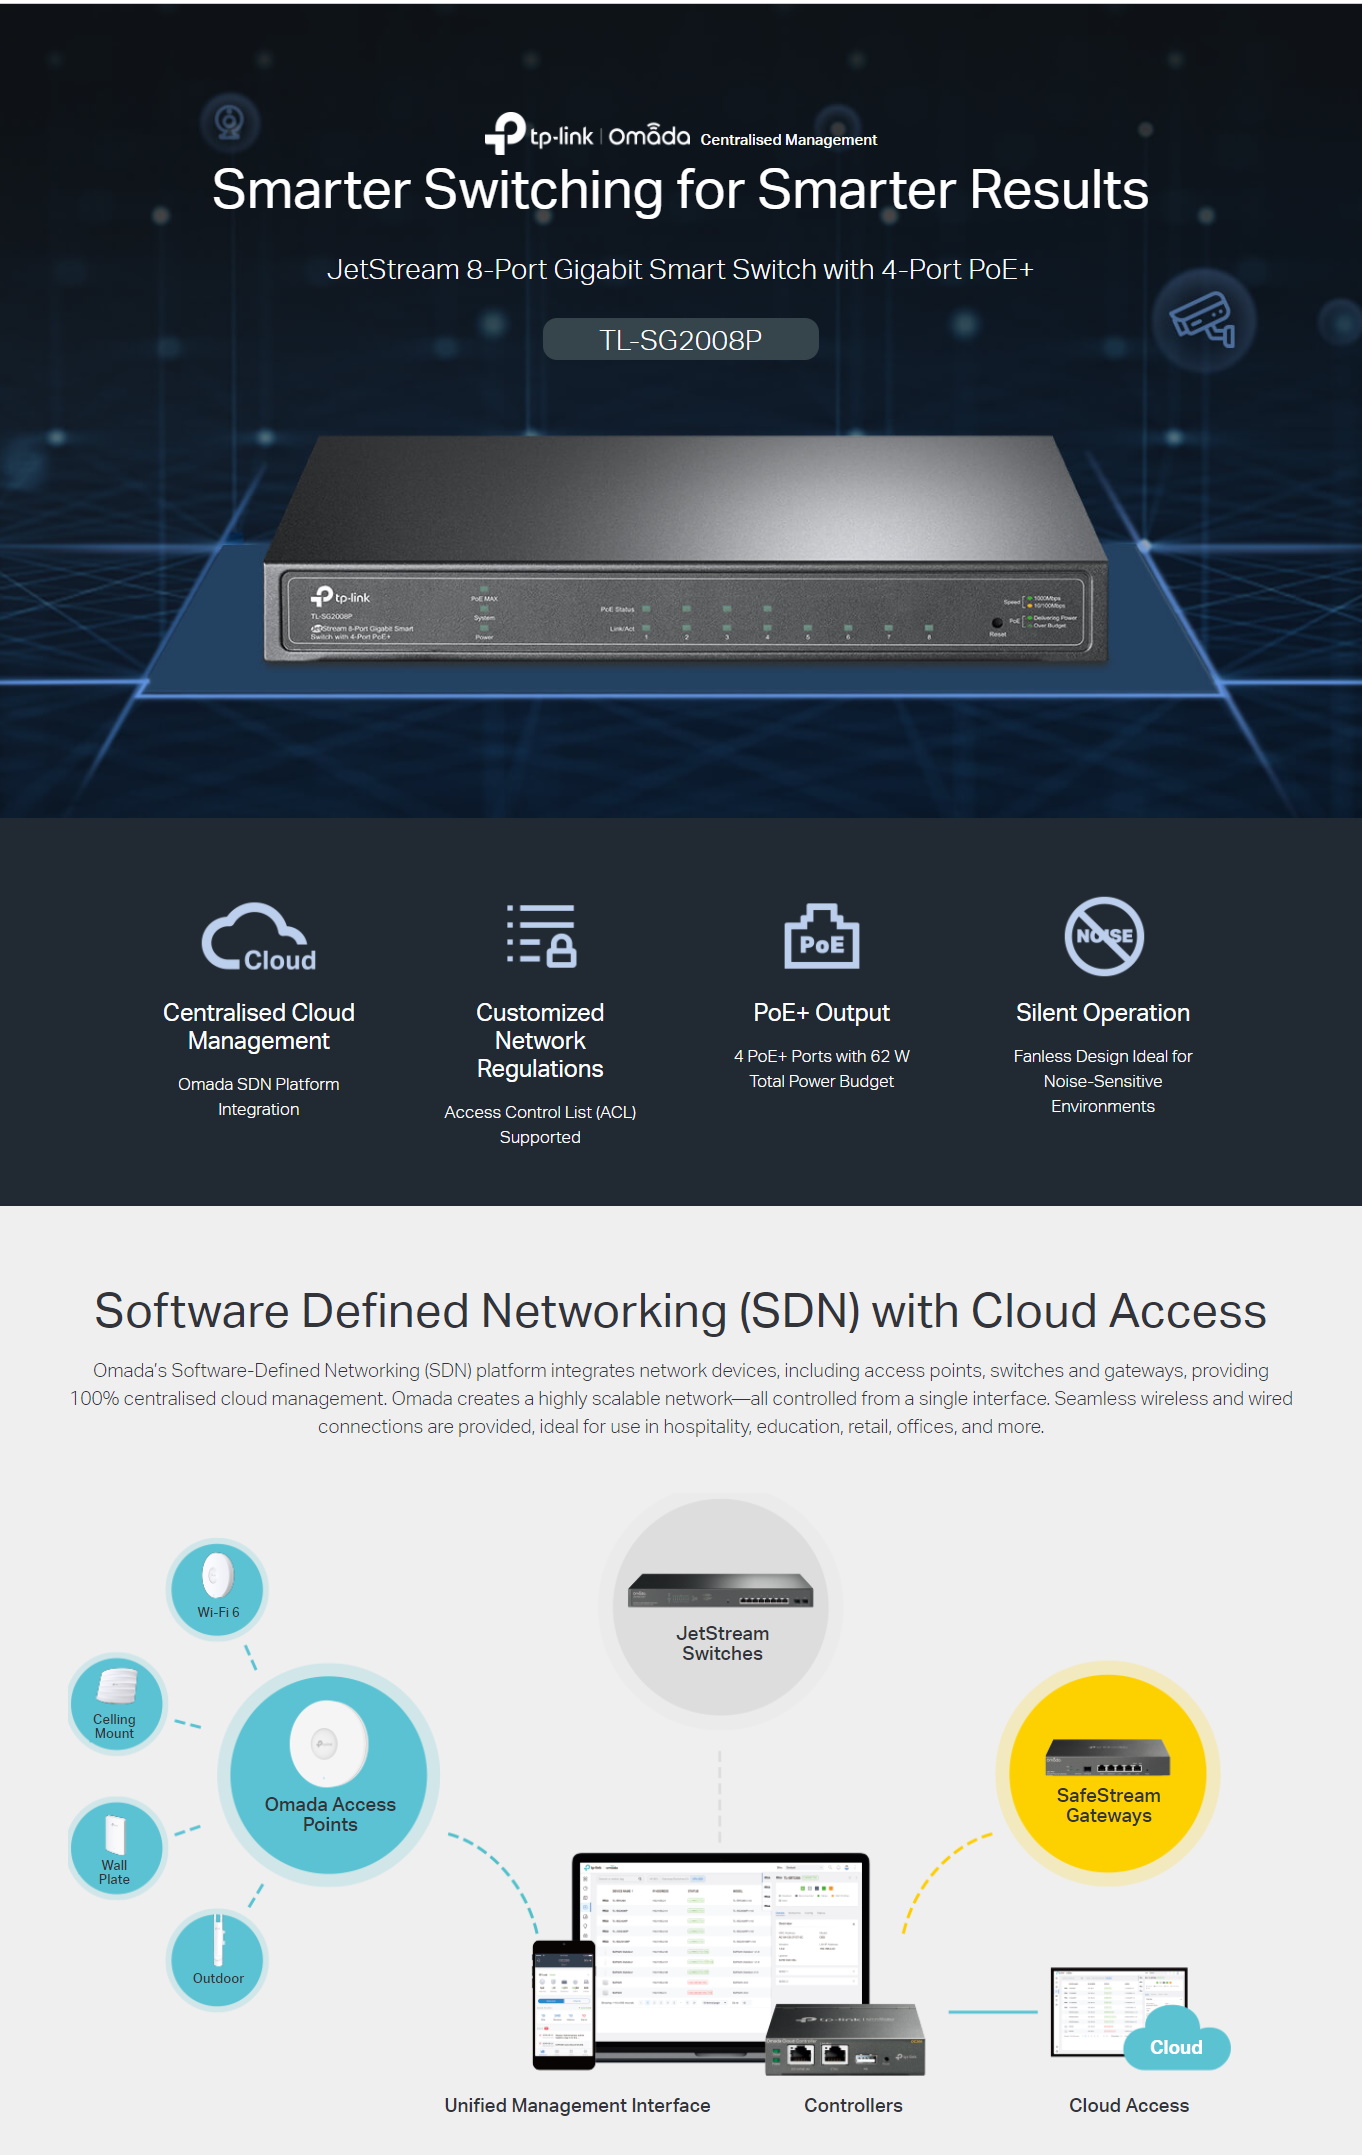 A large marketing image providing additional information about the product TP-Link JetStream SG2008P - 8-Port Gigabit Smart Switch with 4-Port PoE+ - Additional alt info not provided